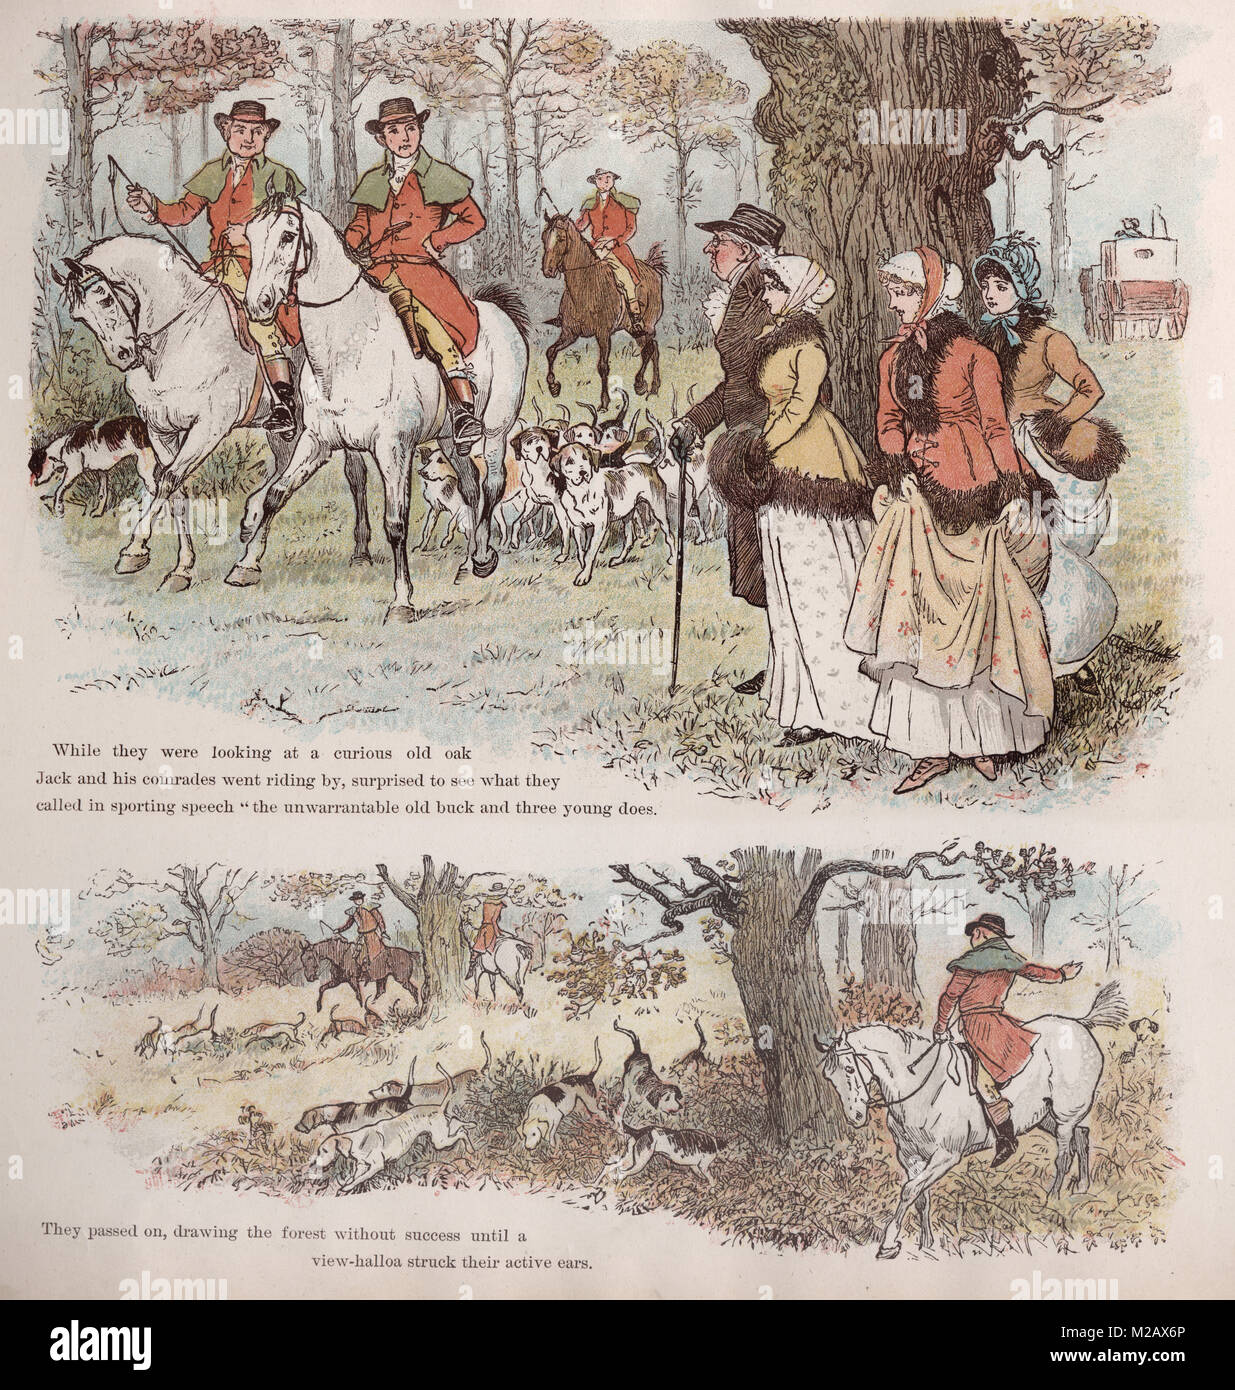 Scene from the The Legend of the Laughing Oak, Randolph Caldecott. Jack and his comrades went riding by Stock Photo